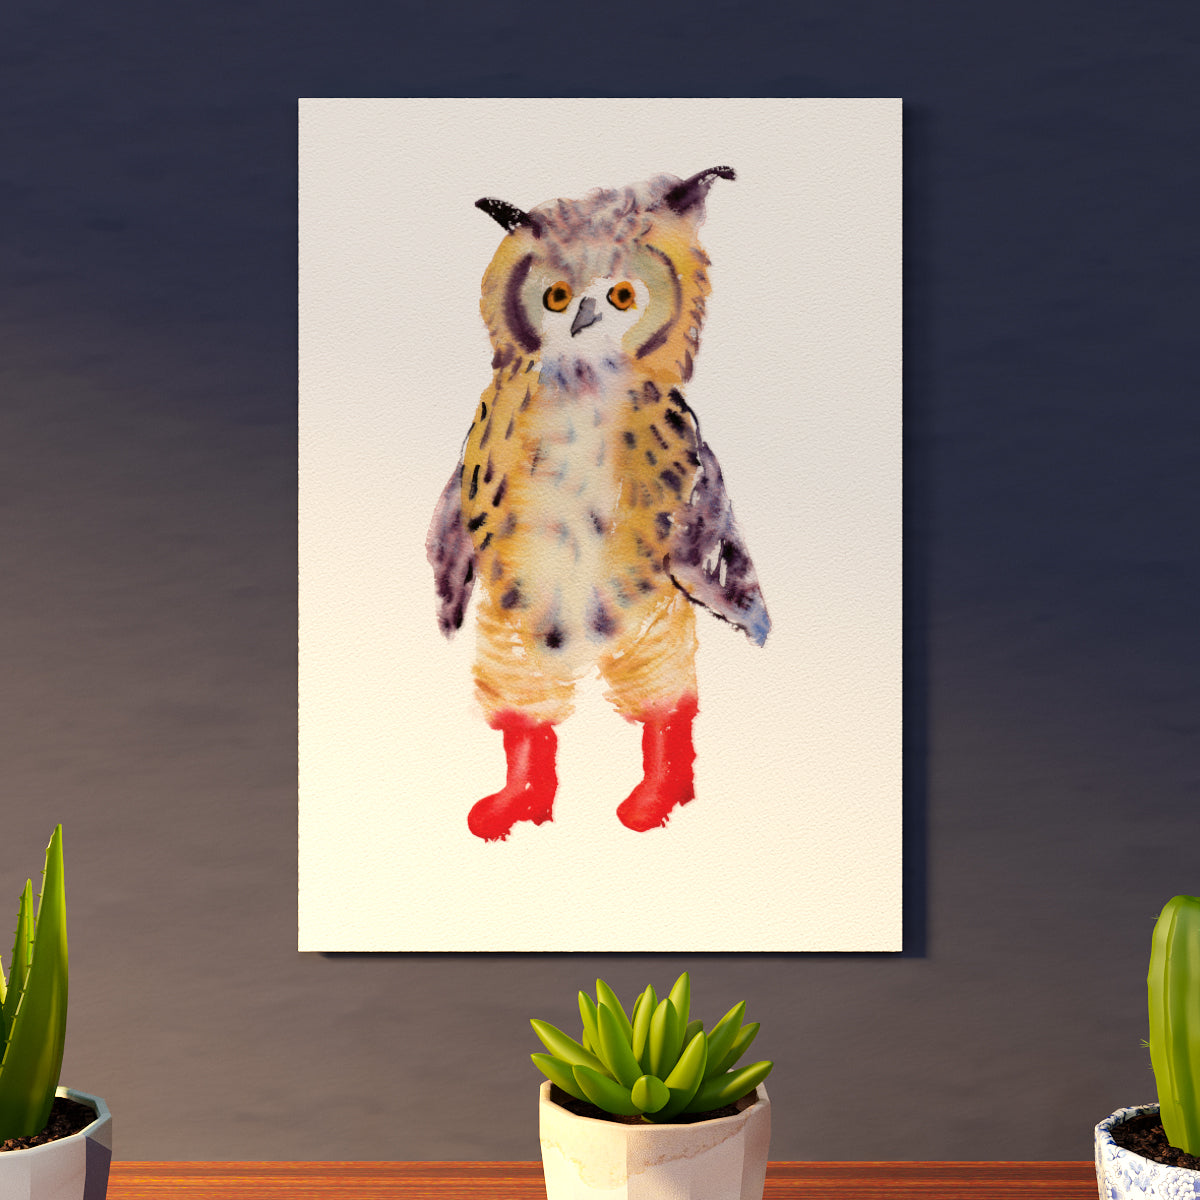 Owl in Boots